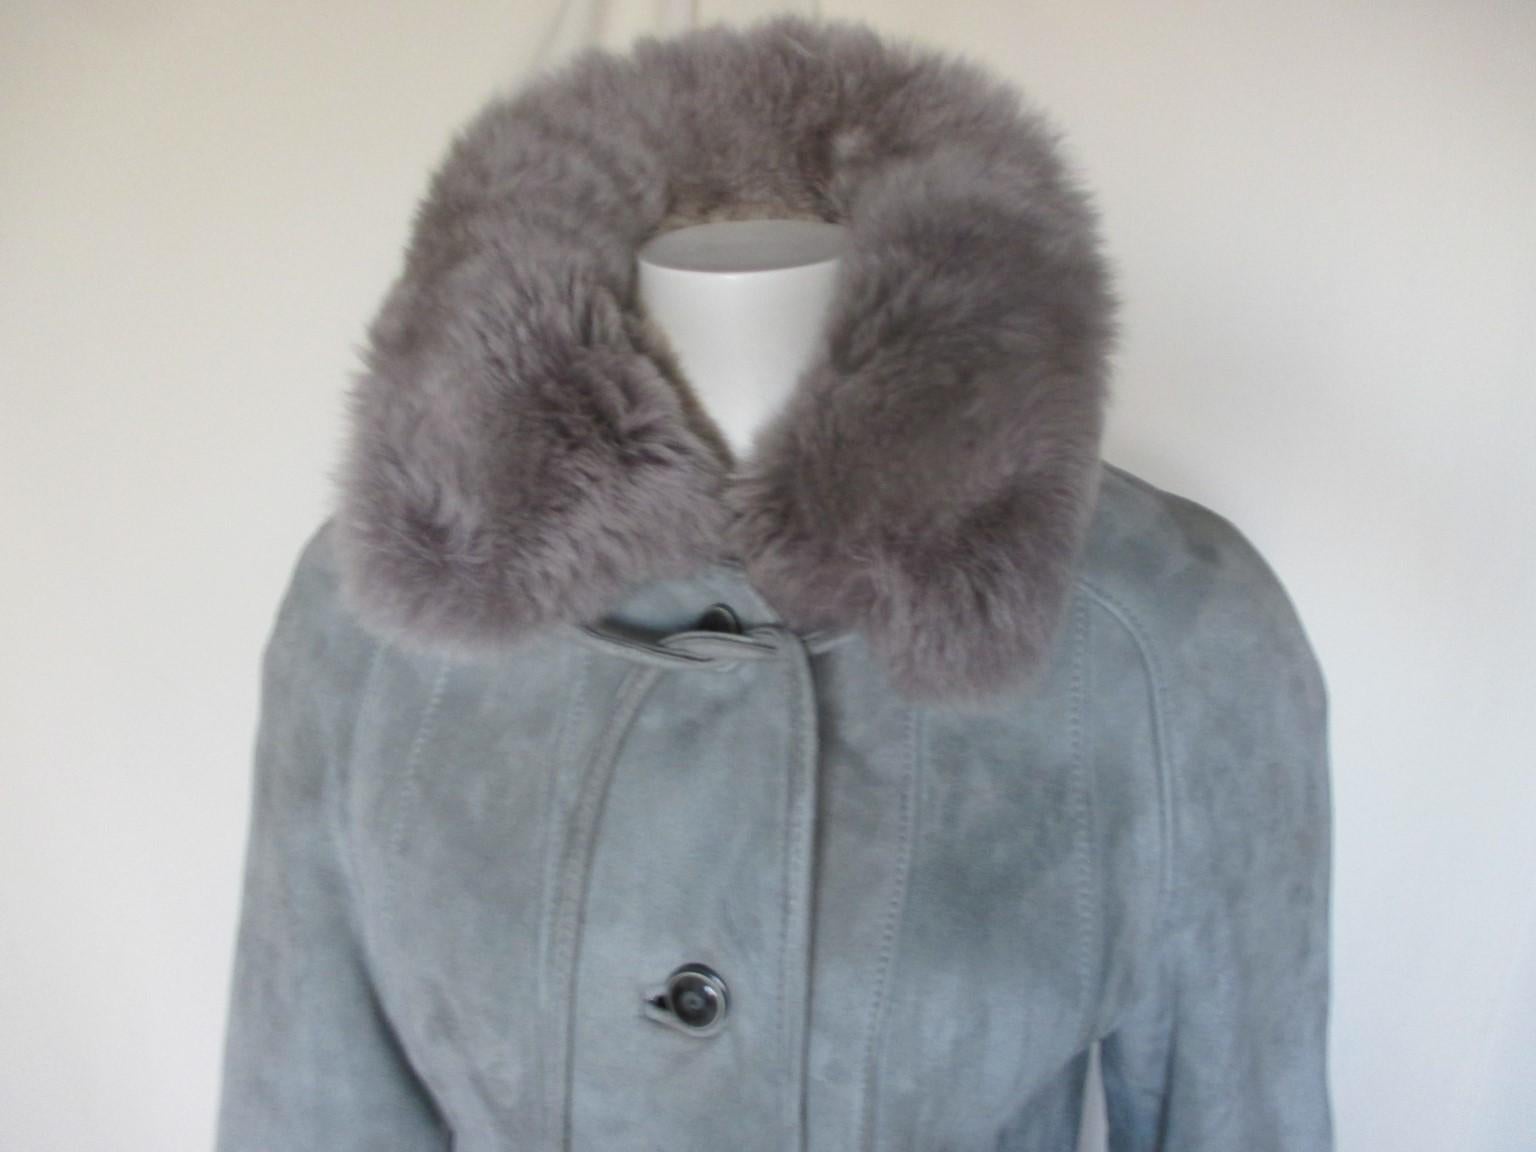 Superb quality suede exterior and lamb interior warm vintage coat.

We offer more lambskin, shearling and fur items, see our frontstore

Details:
With 2 pockets, 5 buttons 
 1 belt at collar and closing belt with fringe.
Color: Ice blue
From 